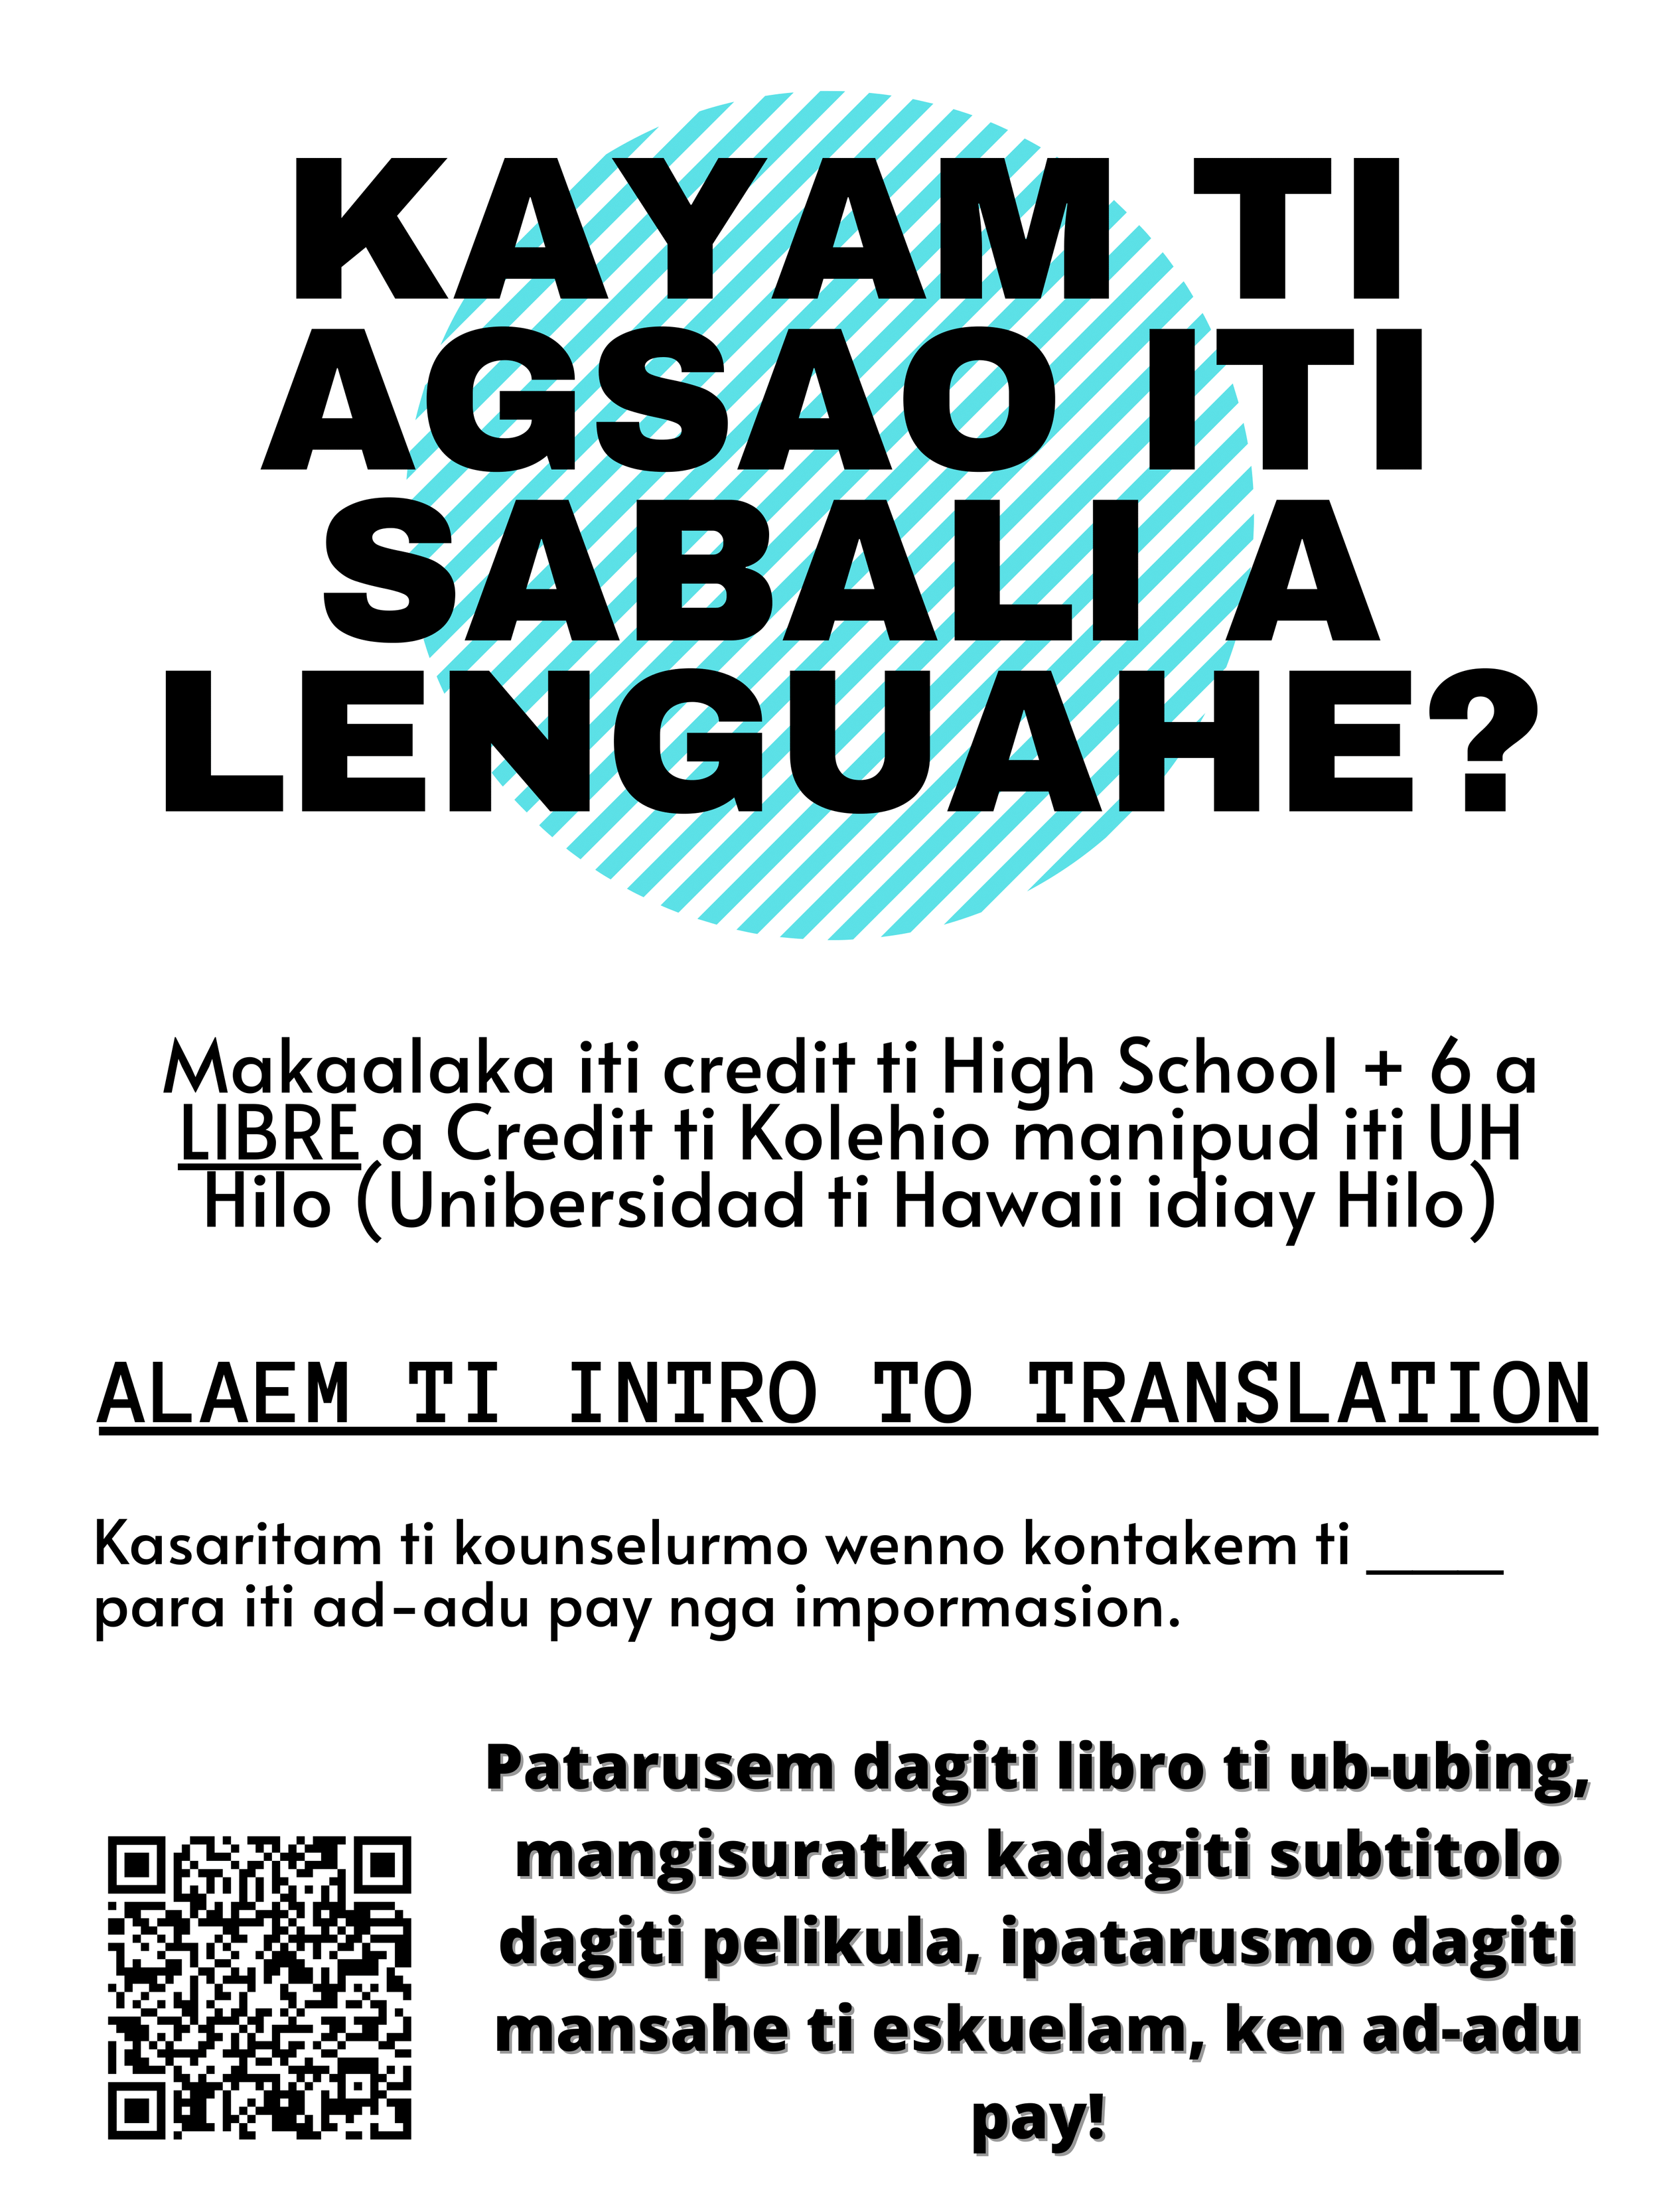 Translation Class Posters Multiple Languages-2.png